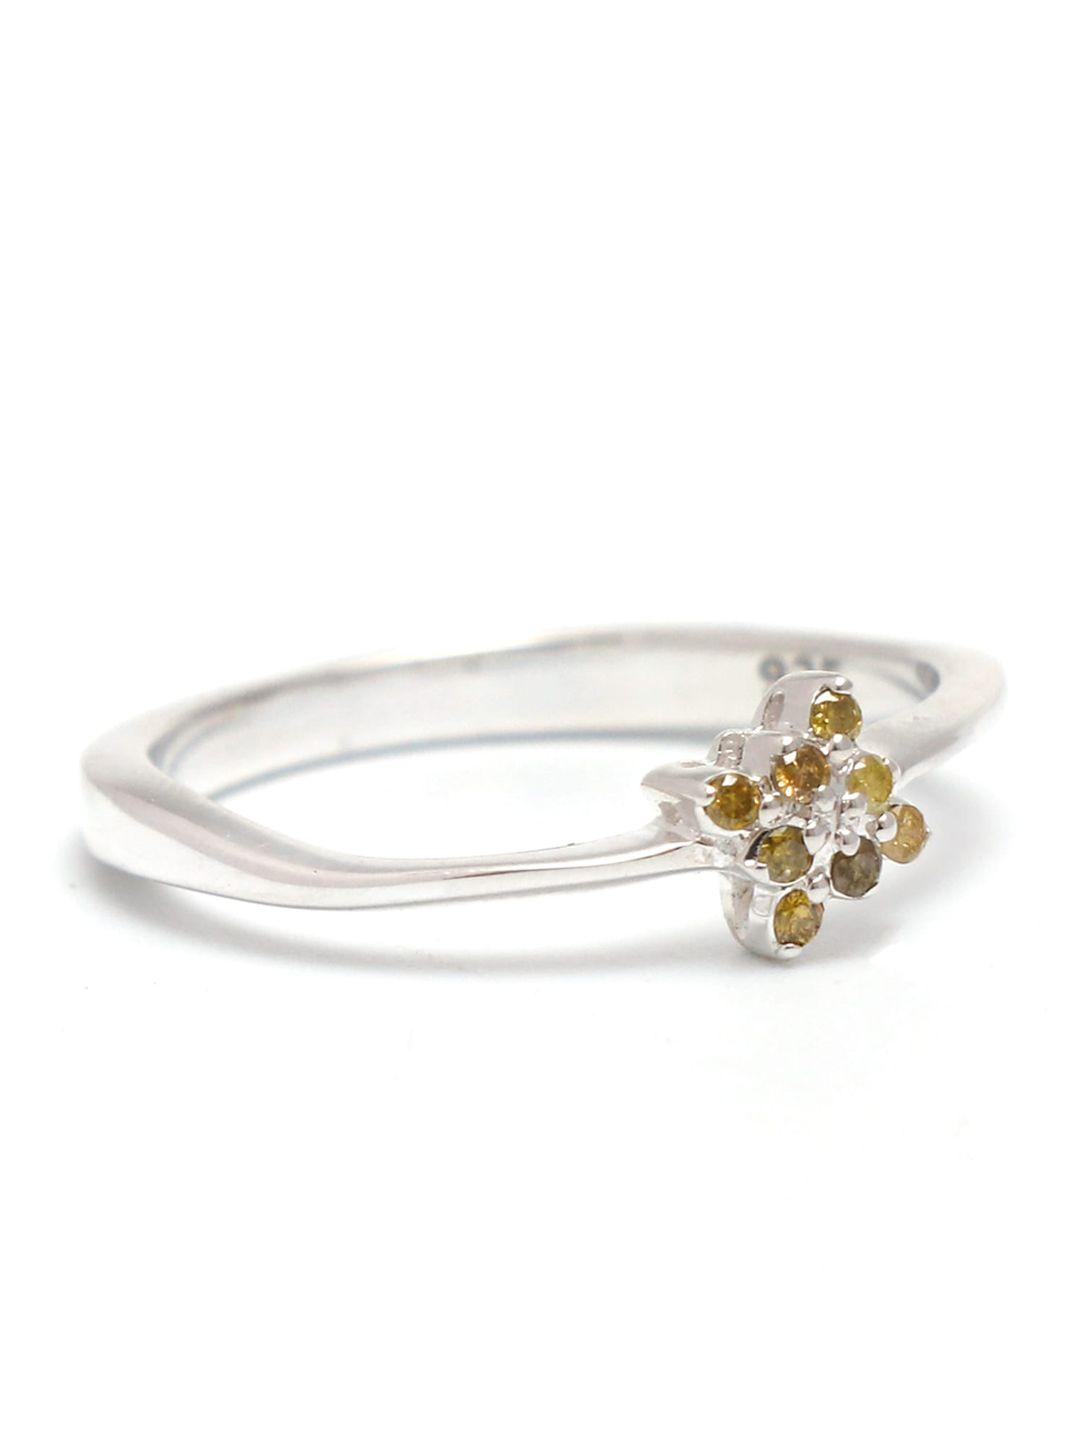 hiflyer jewels sterling silver stone-studded finger ring